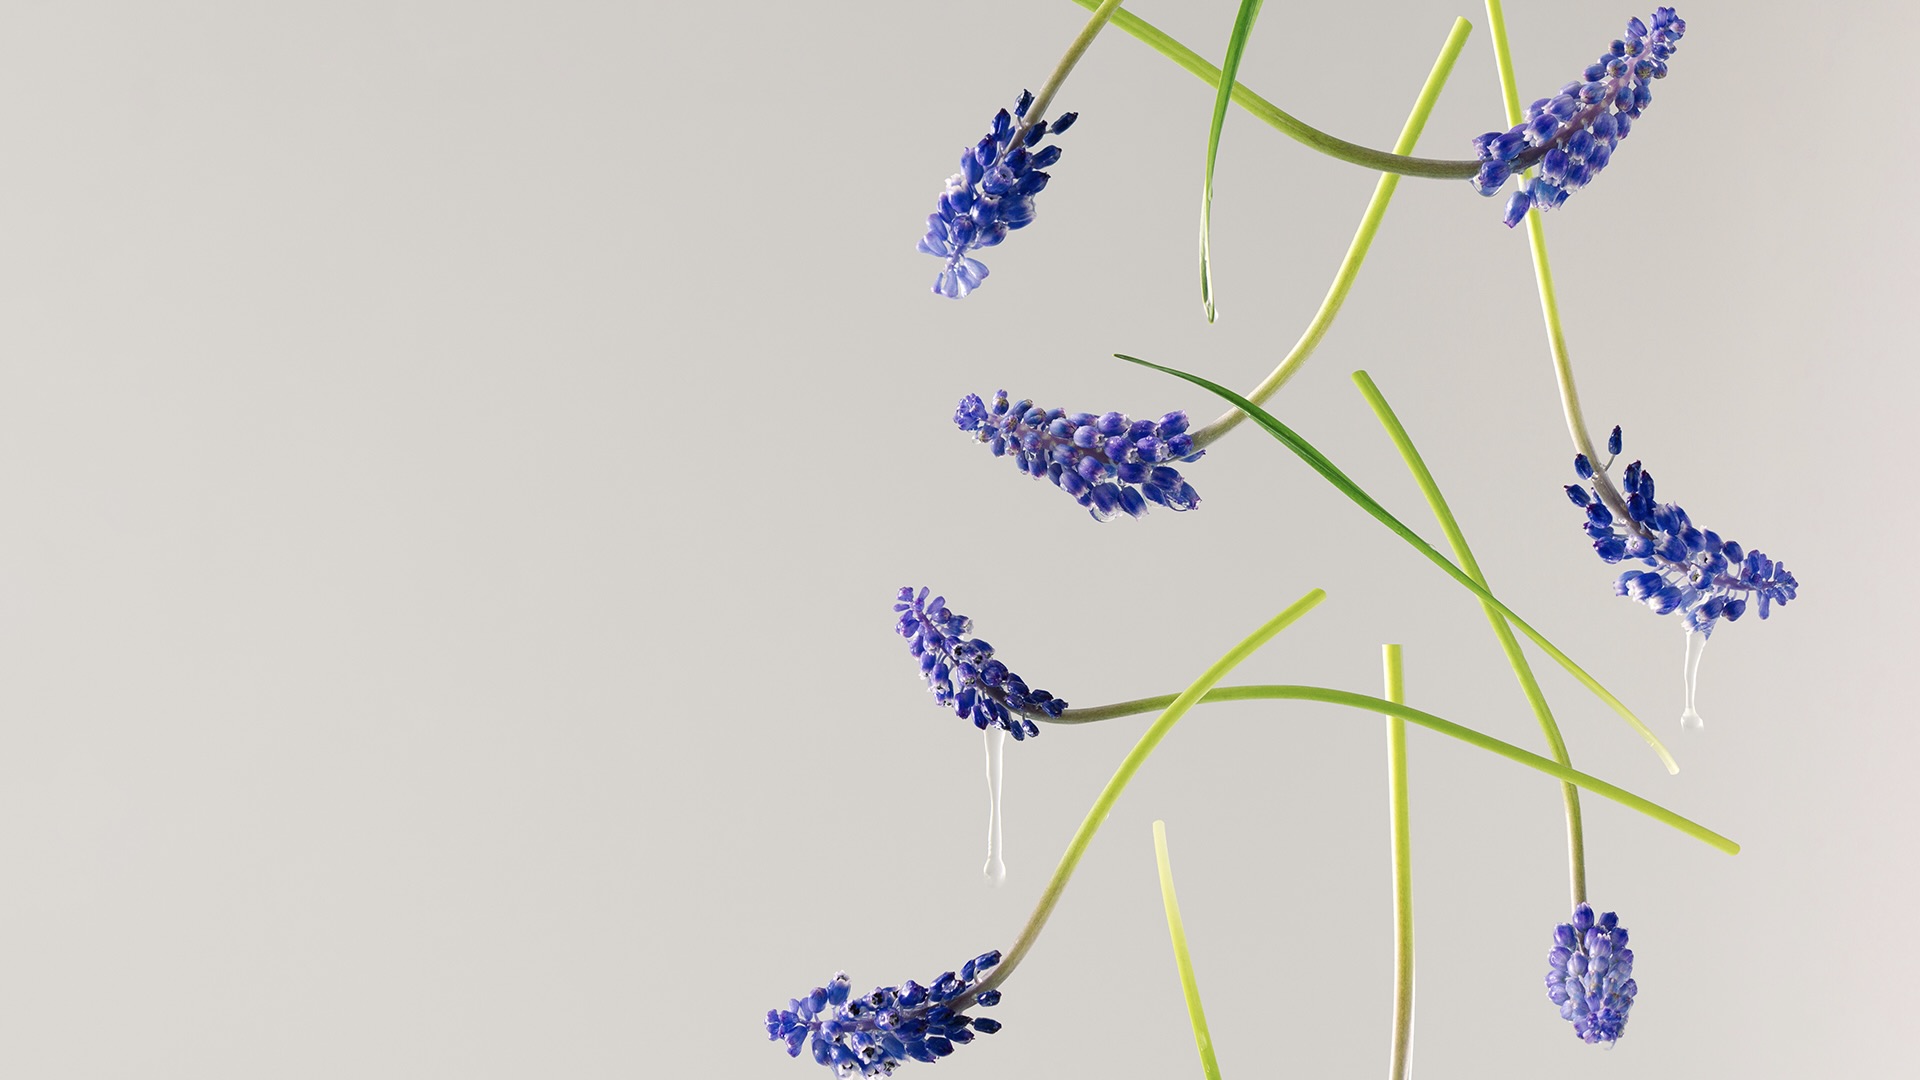 Purple blue grape hyacinth flowers with water drops free falling against bright gray background. Minimal spring bloom creative arrangement. Abstract nature concept